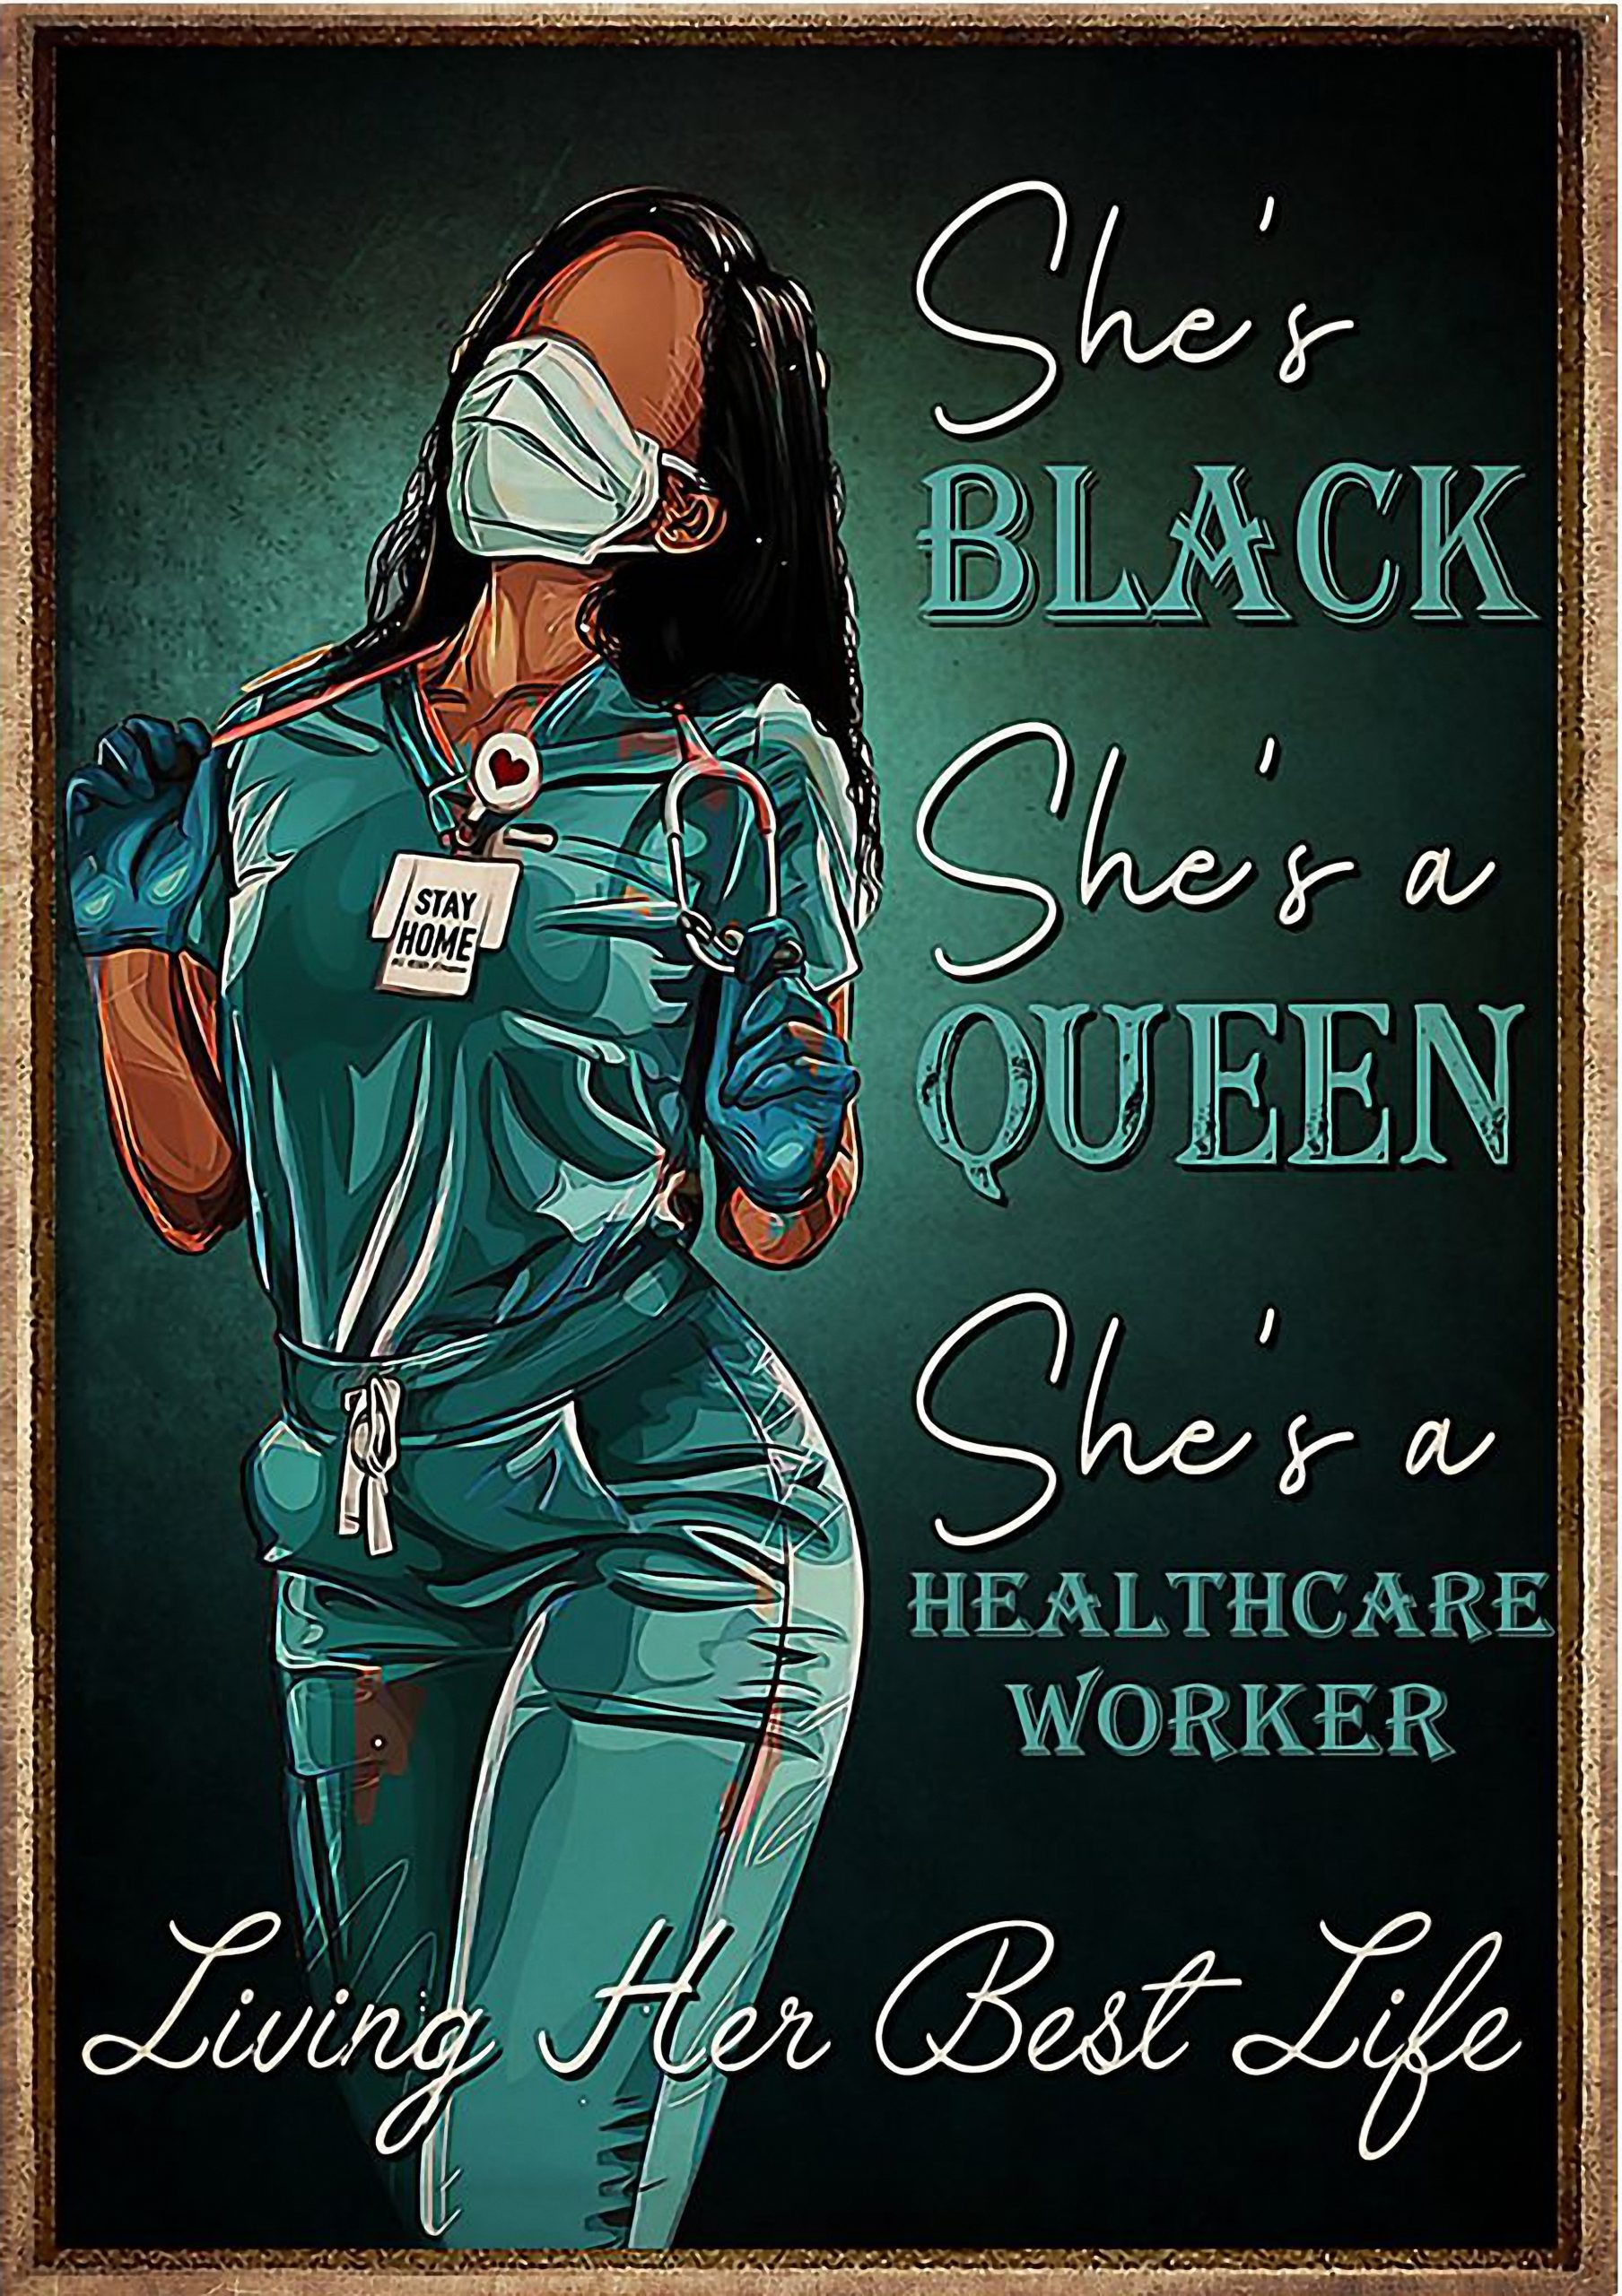 Nurse She's black She's a queen She's a healthcare worker Living her best life posterz